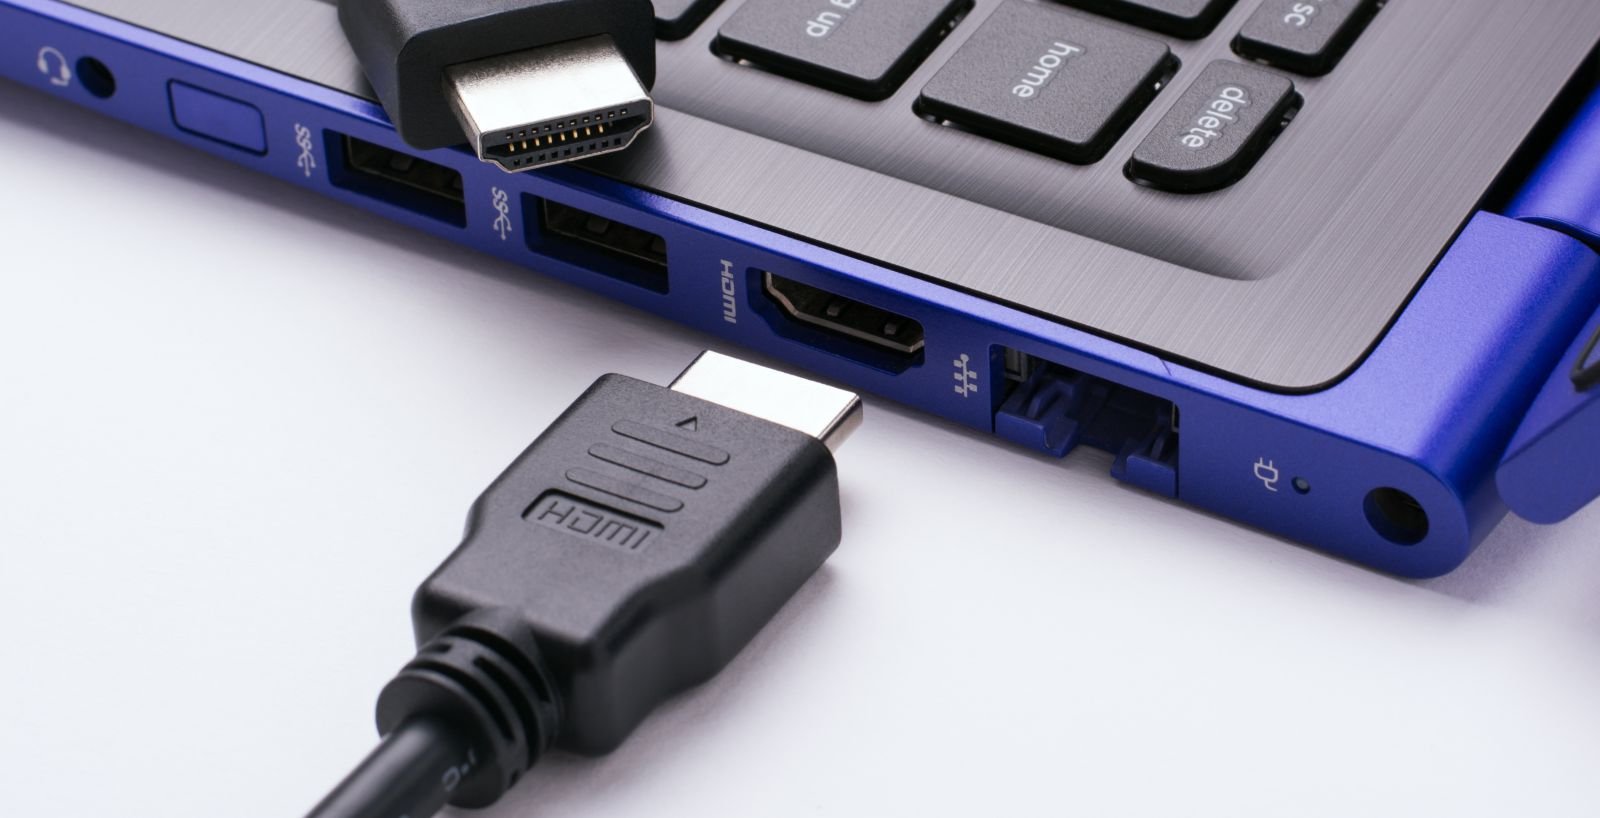 HDMI cable lying next to the blue laptop